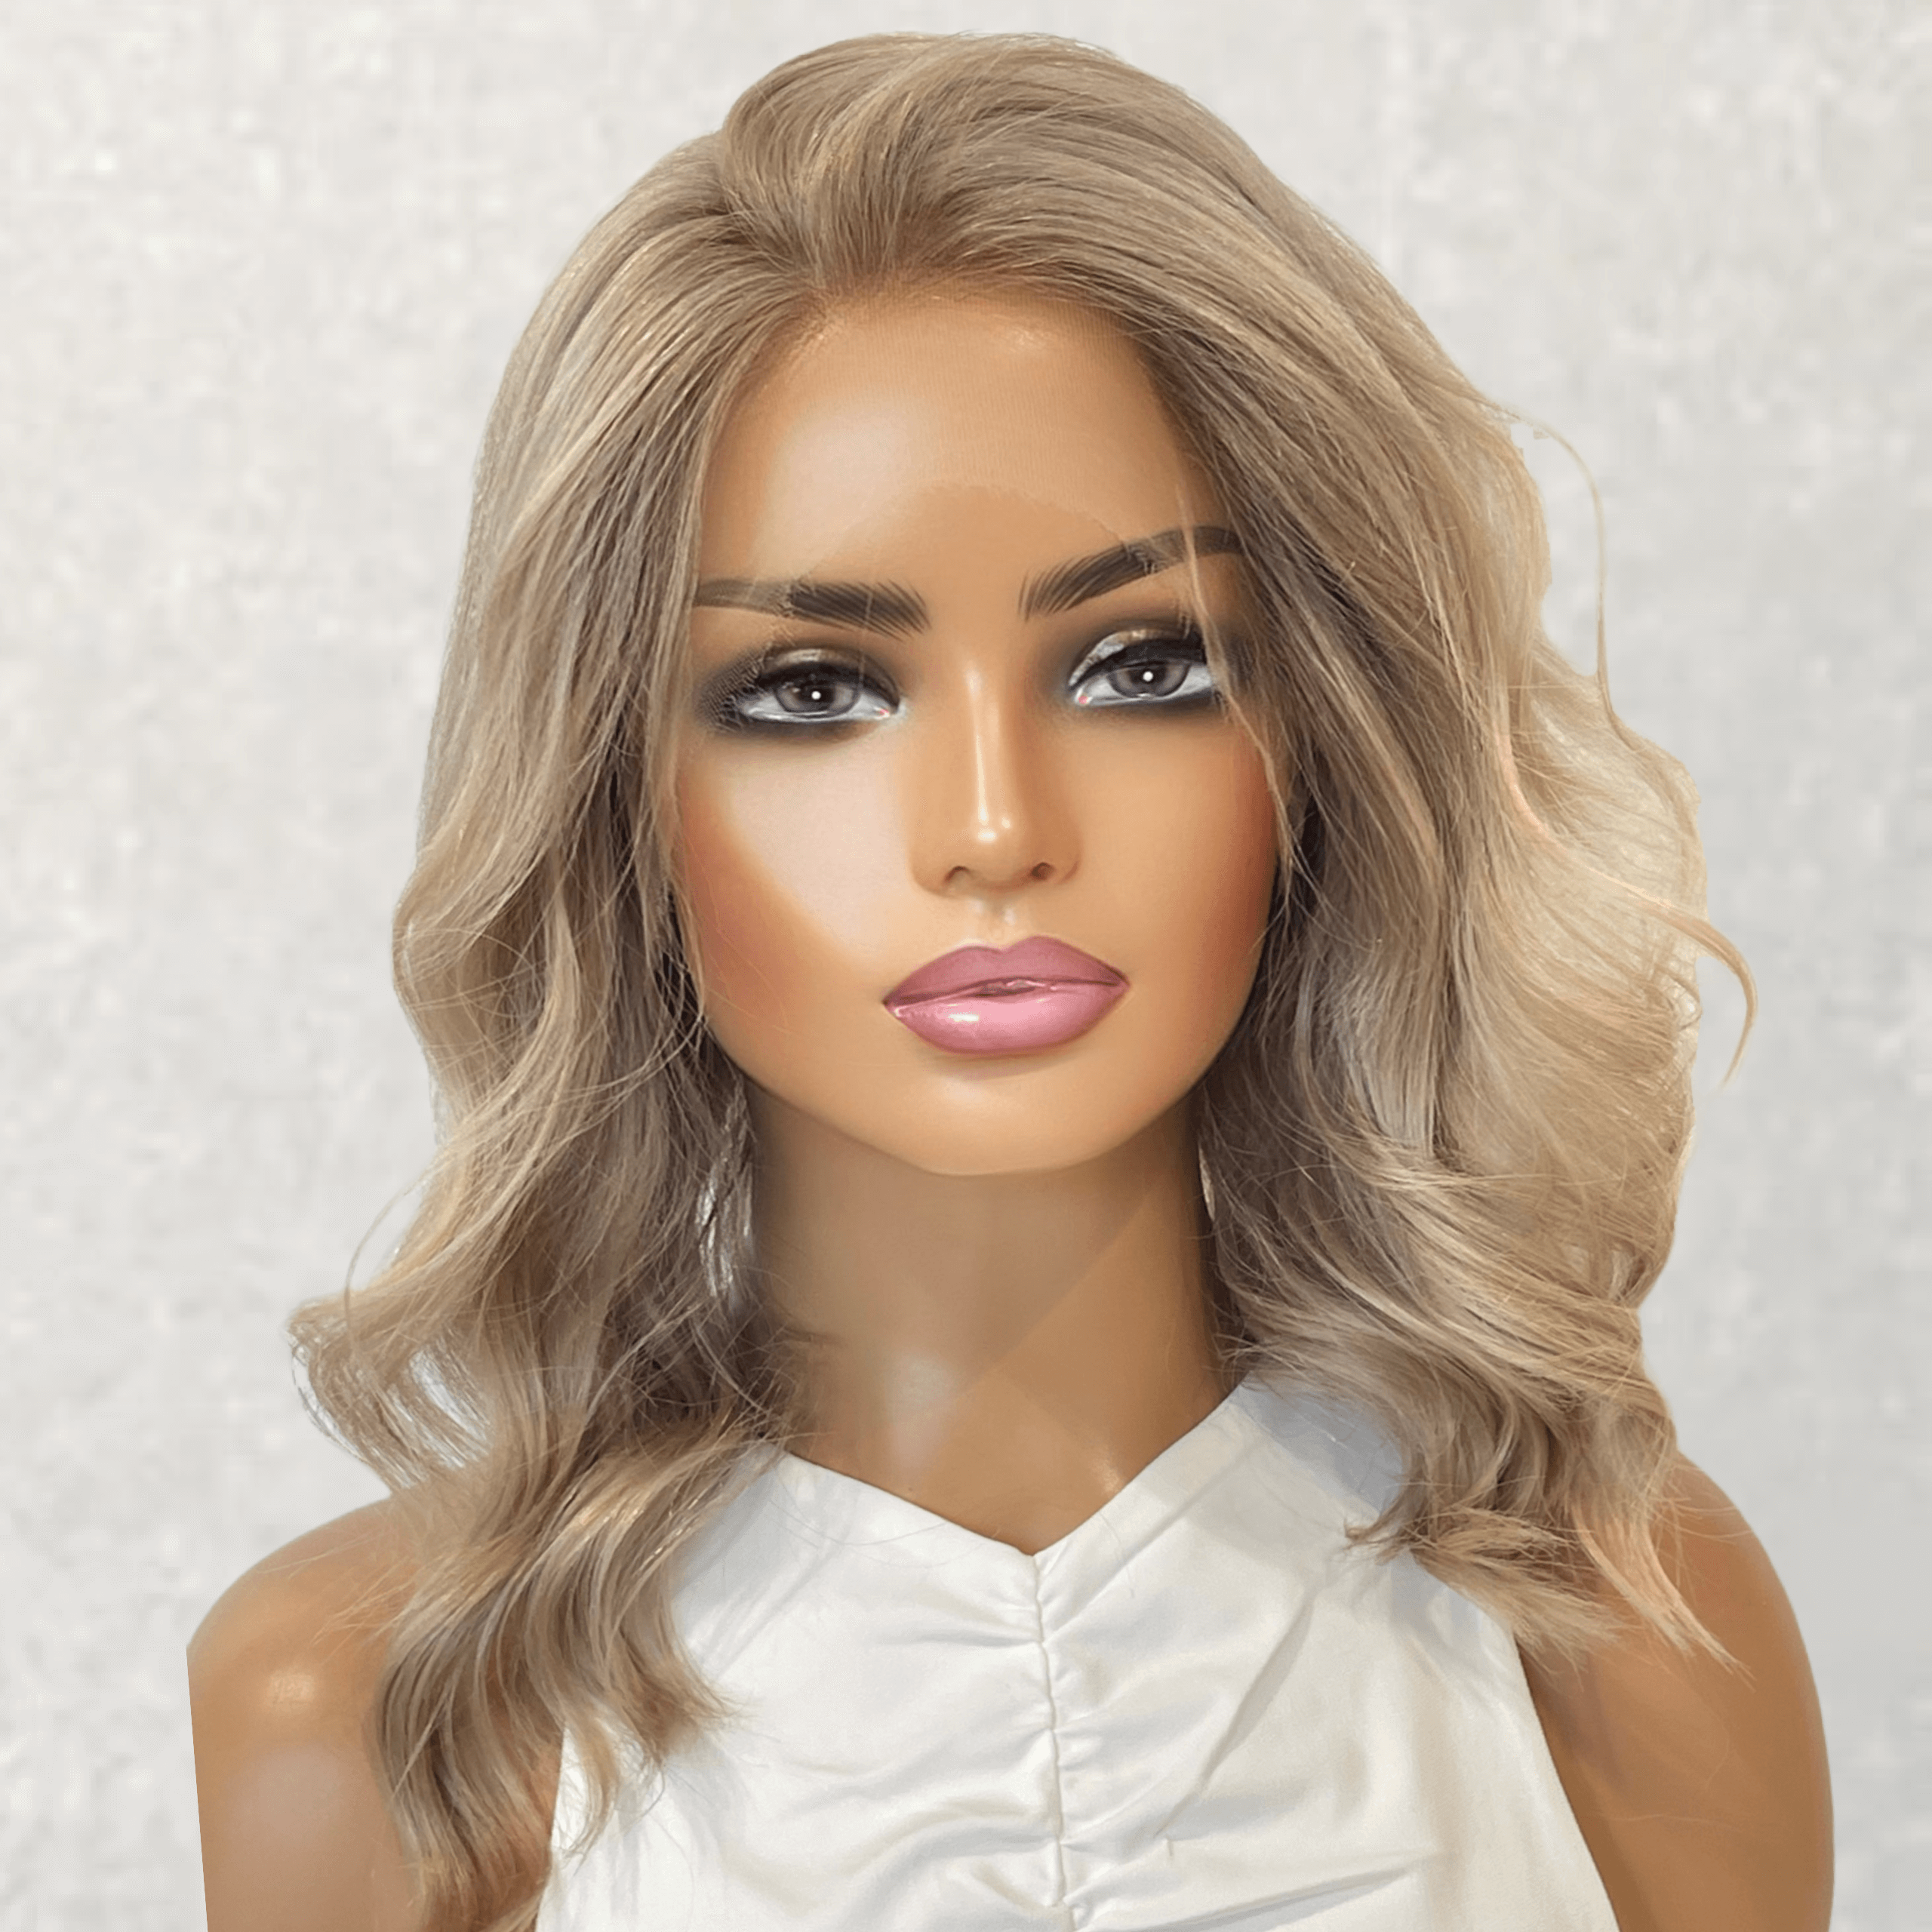 Glueless Lace Front Human Hair Wig Natural Light Blonde Wig 14 Inch - Margot Robbie